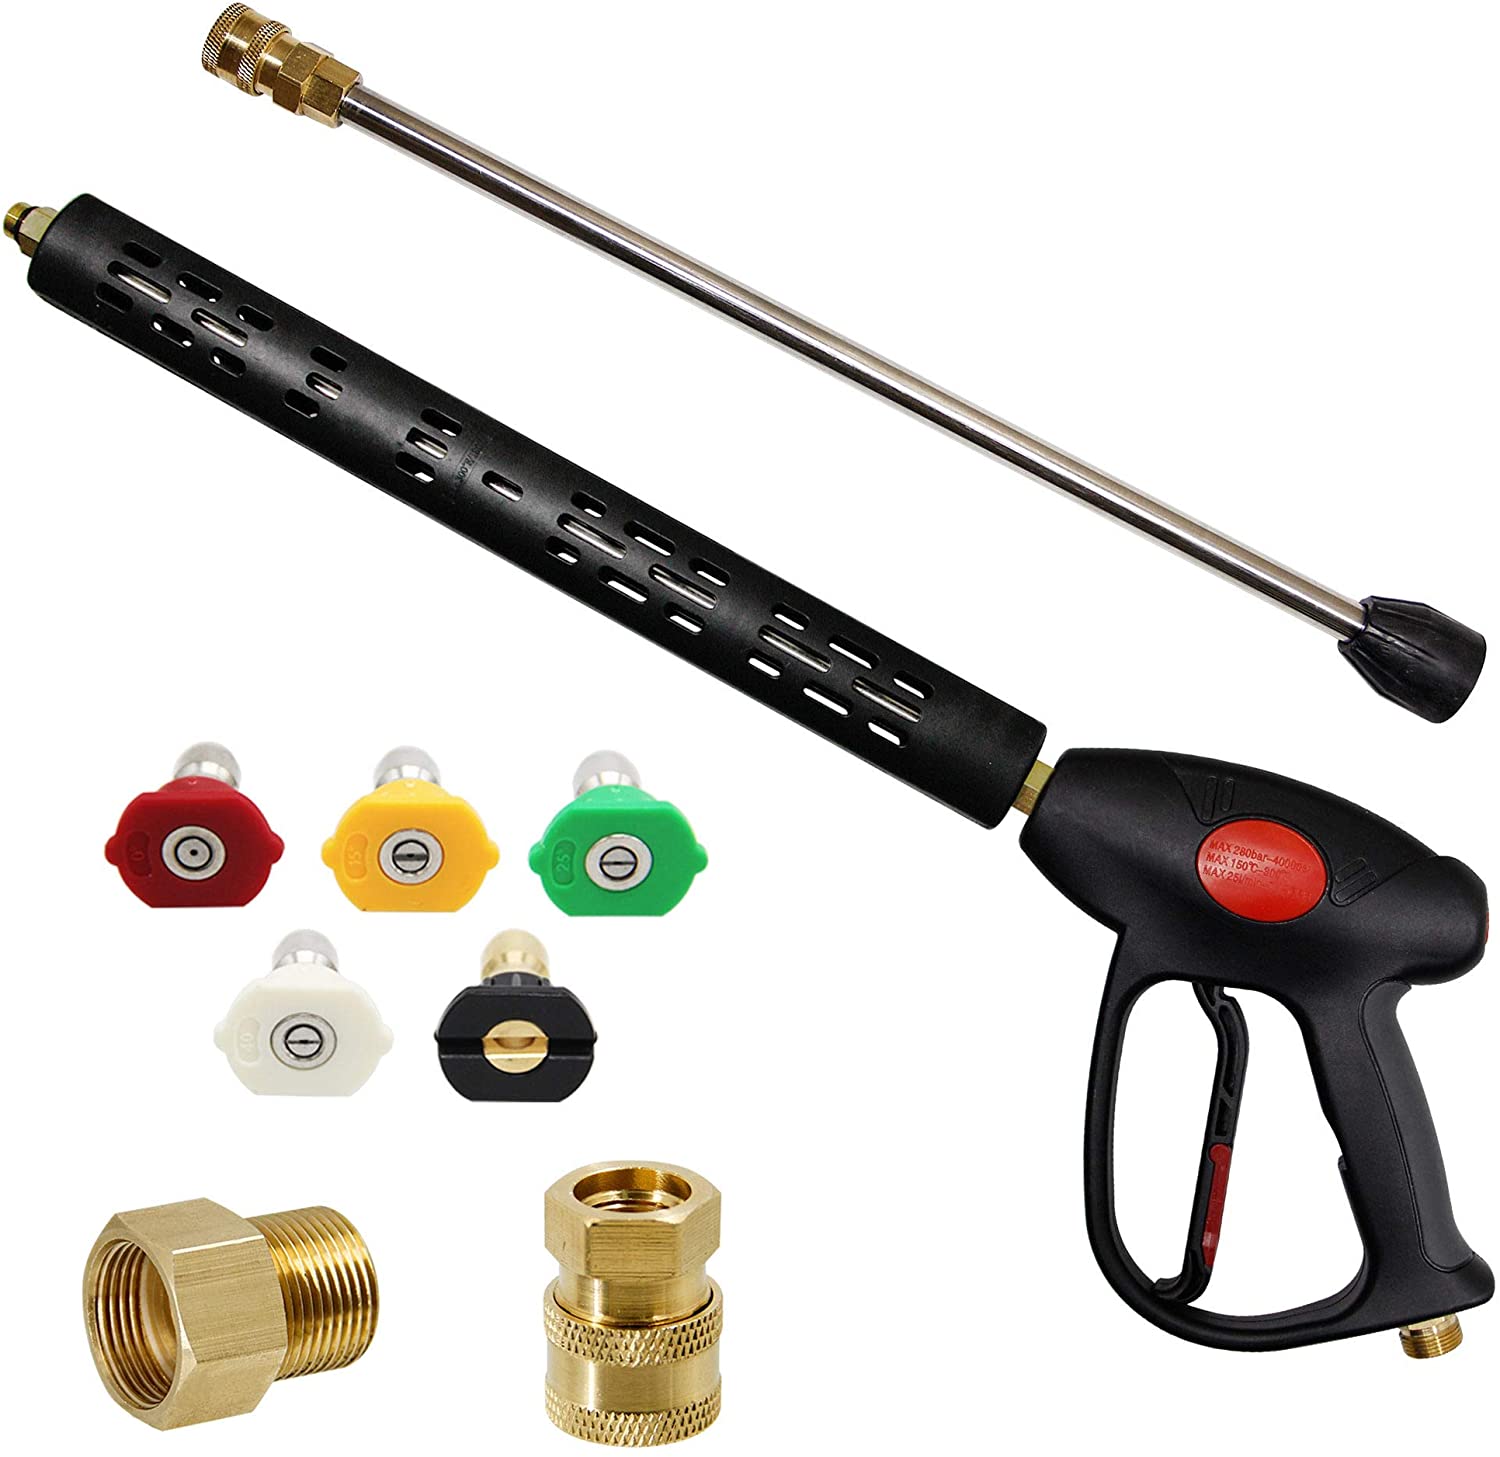 Twinkle Star Quick Connect Power Washer Gun, 4000-PSI